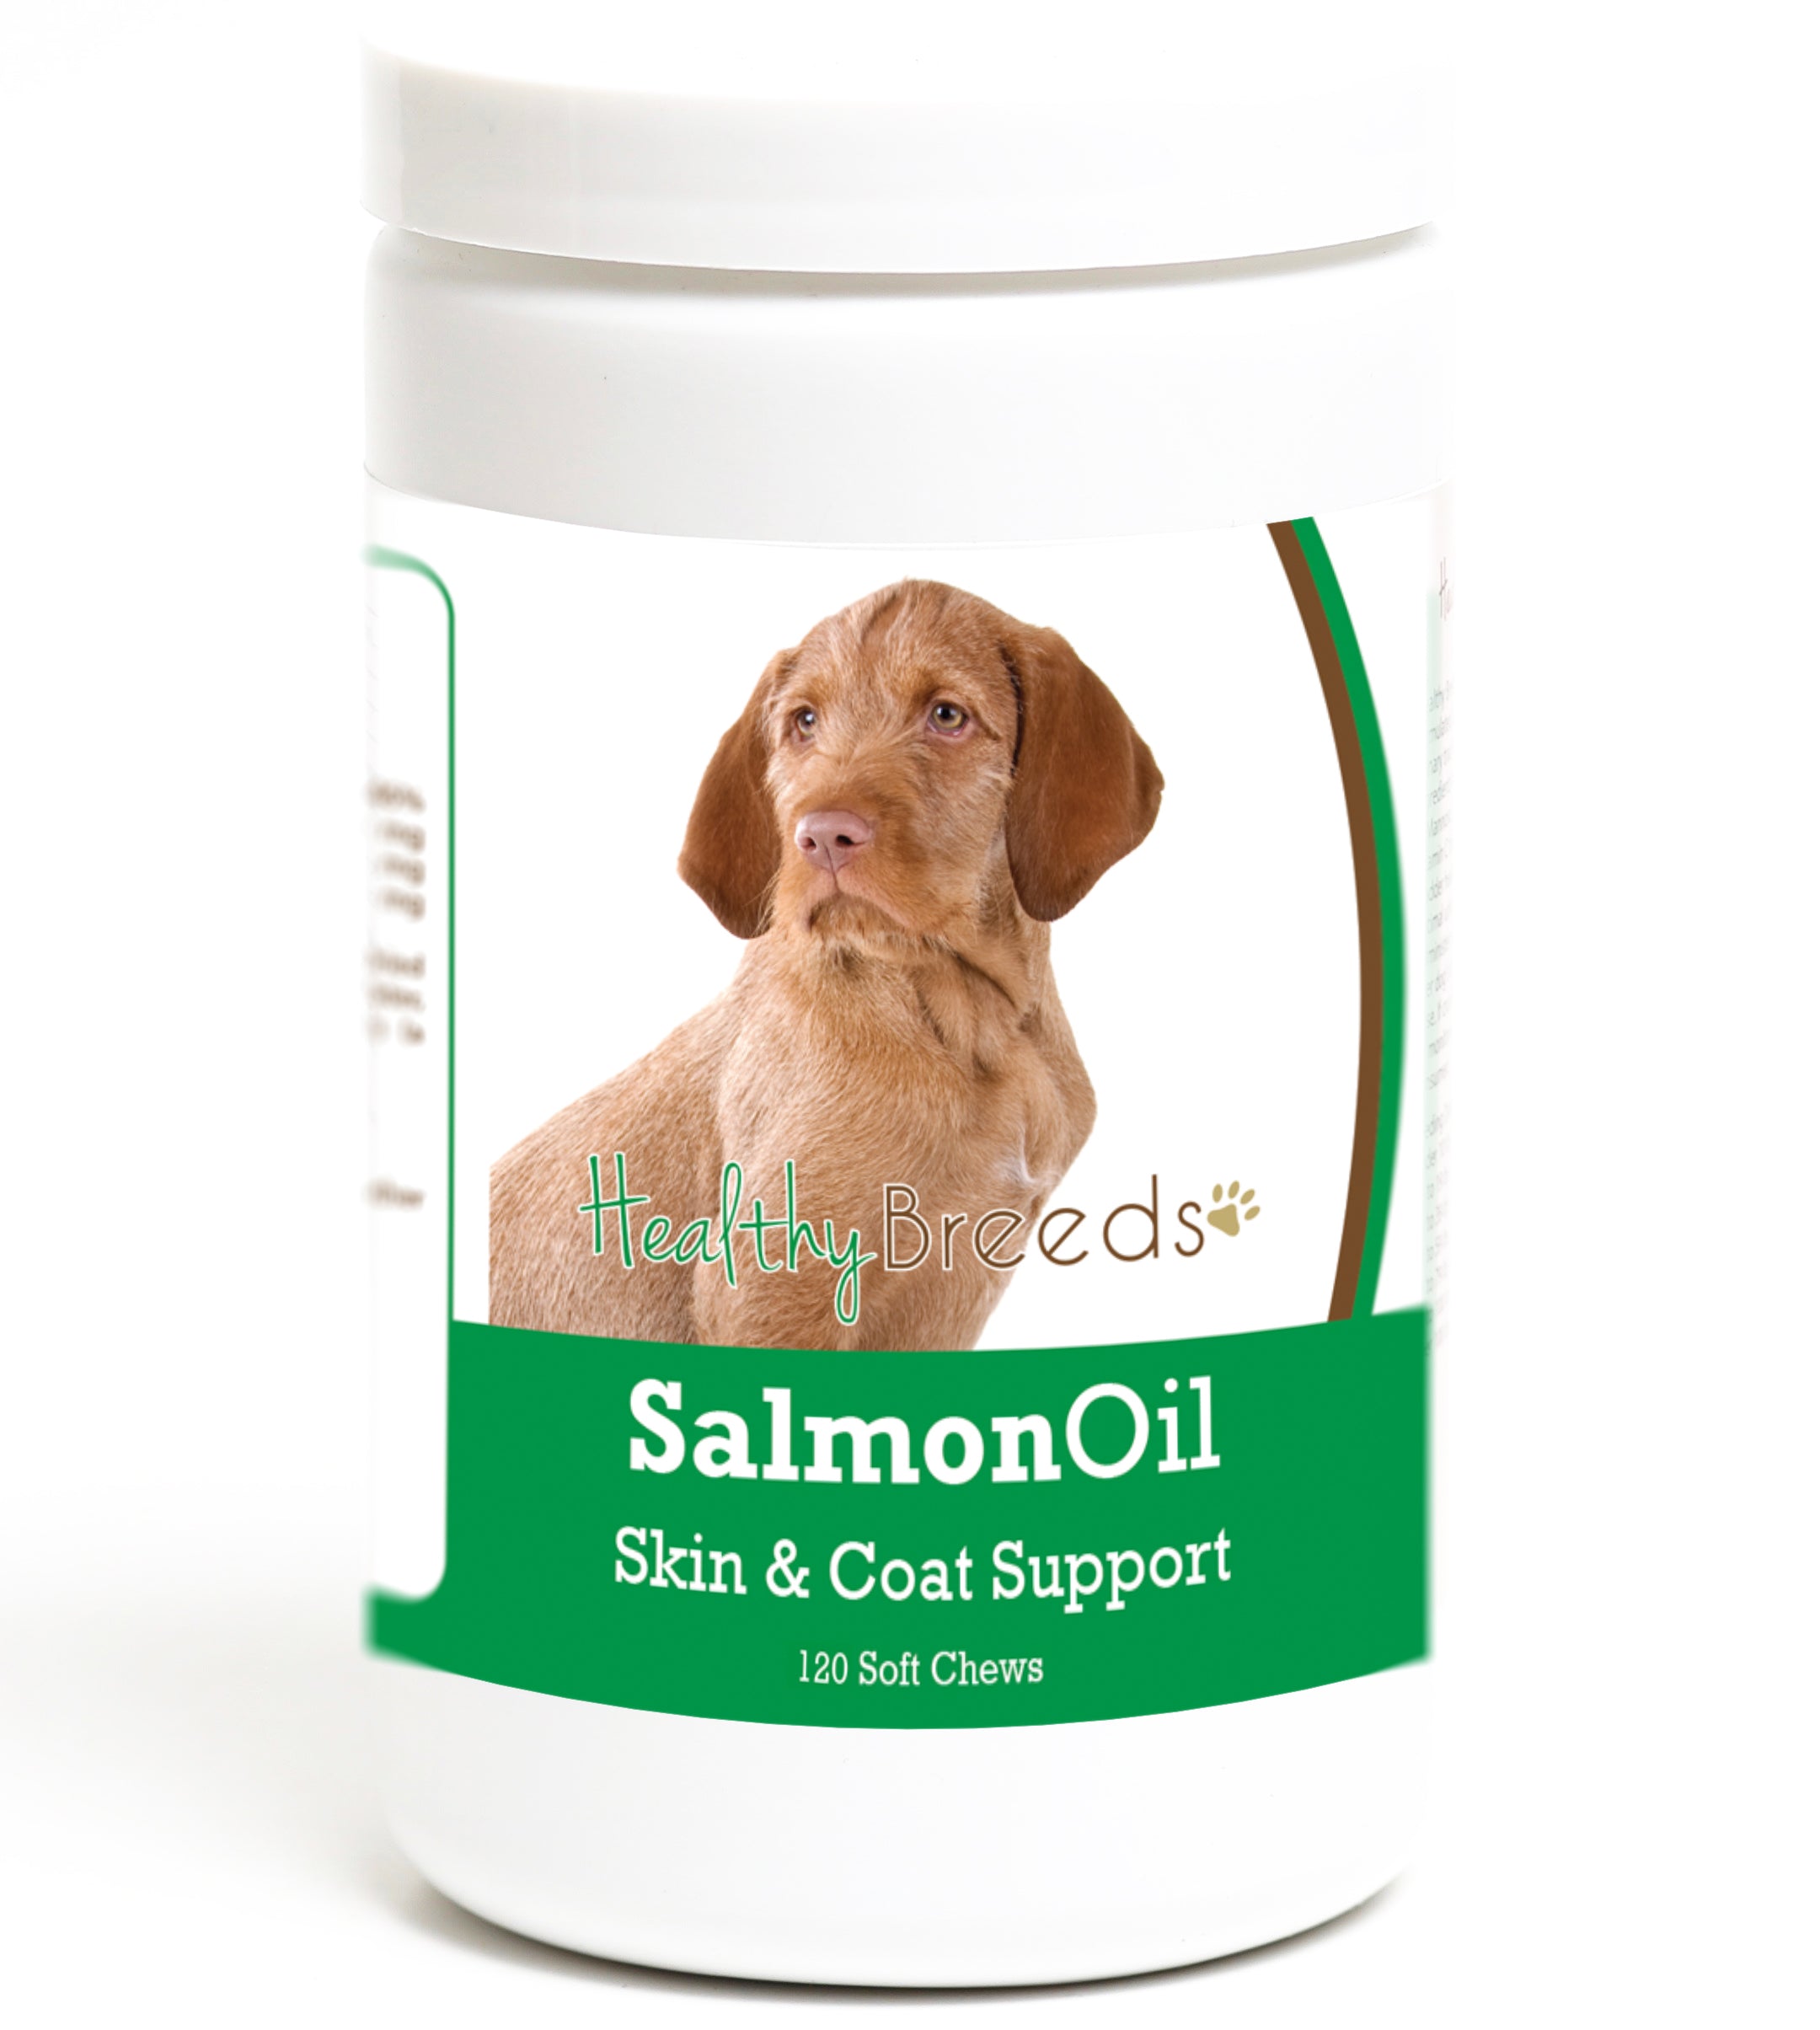 Wirehaired Vizsla Salmon Oil Soft Chews 120 Count